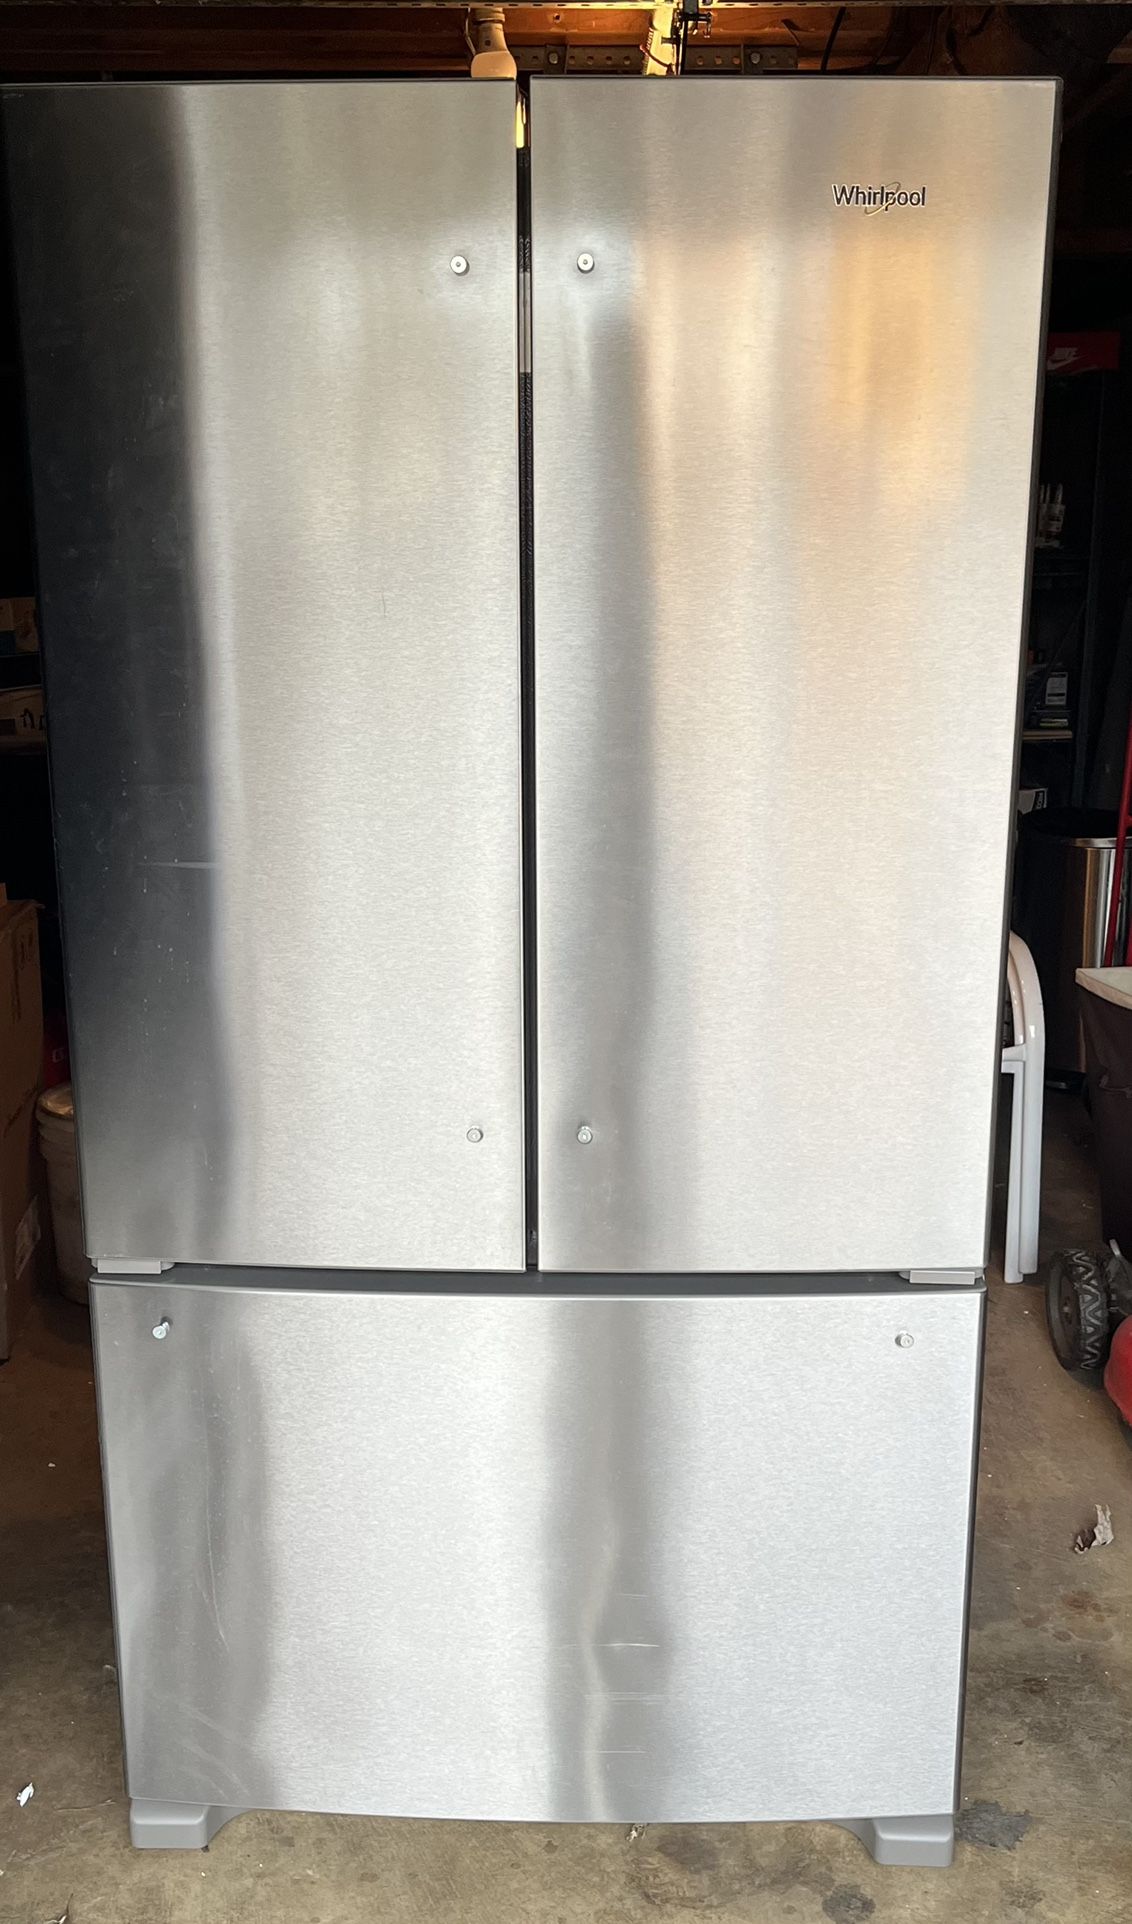 Whirlpool French Door Refrigerator (Discounted)